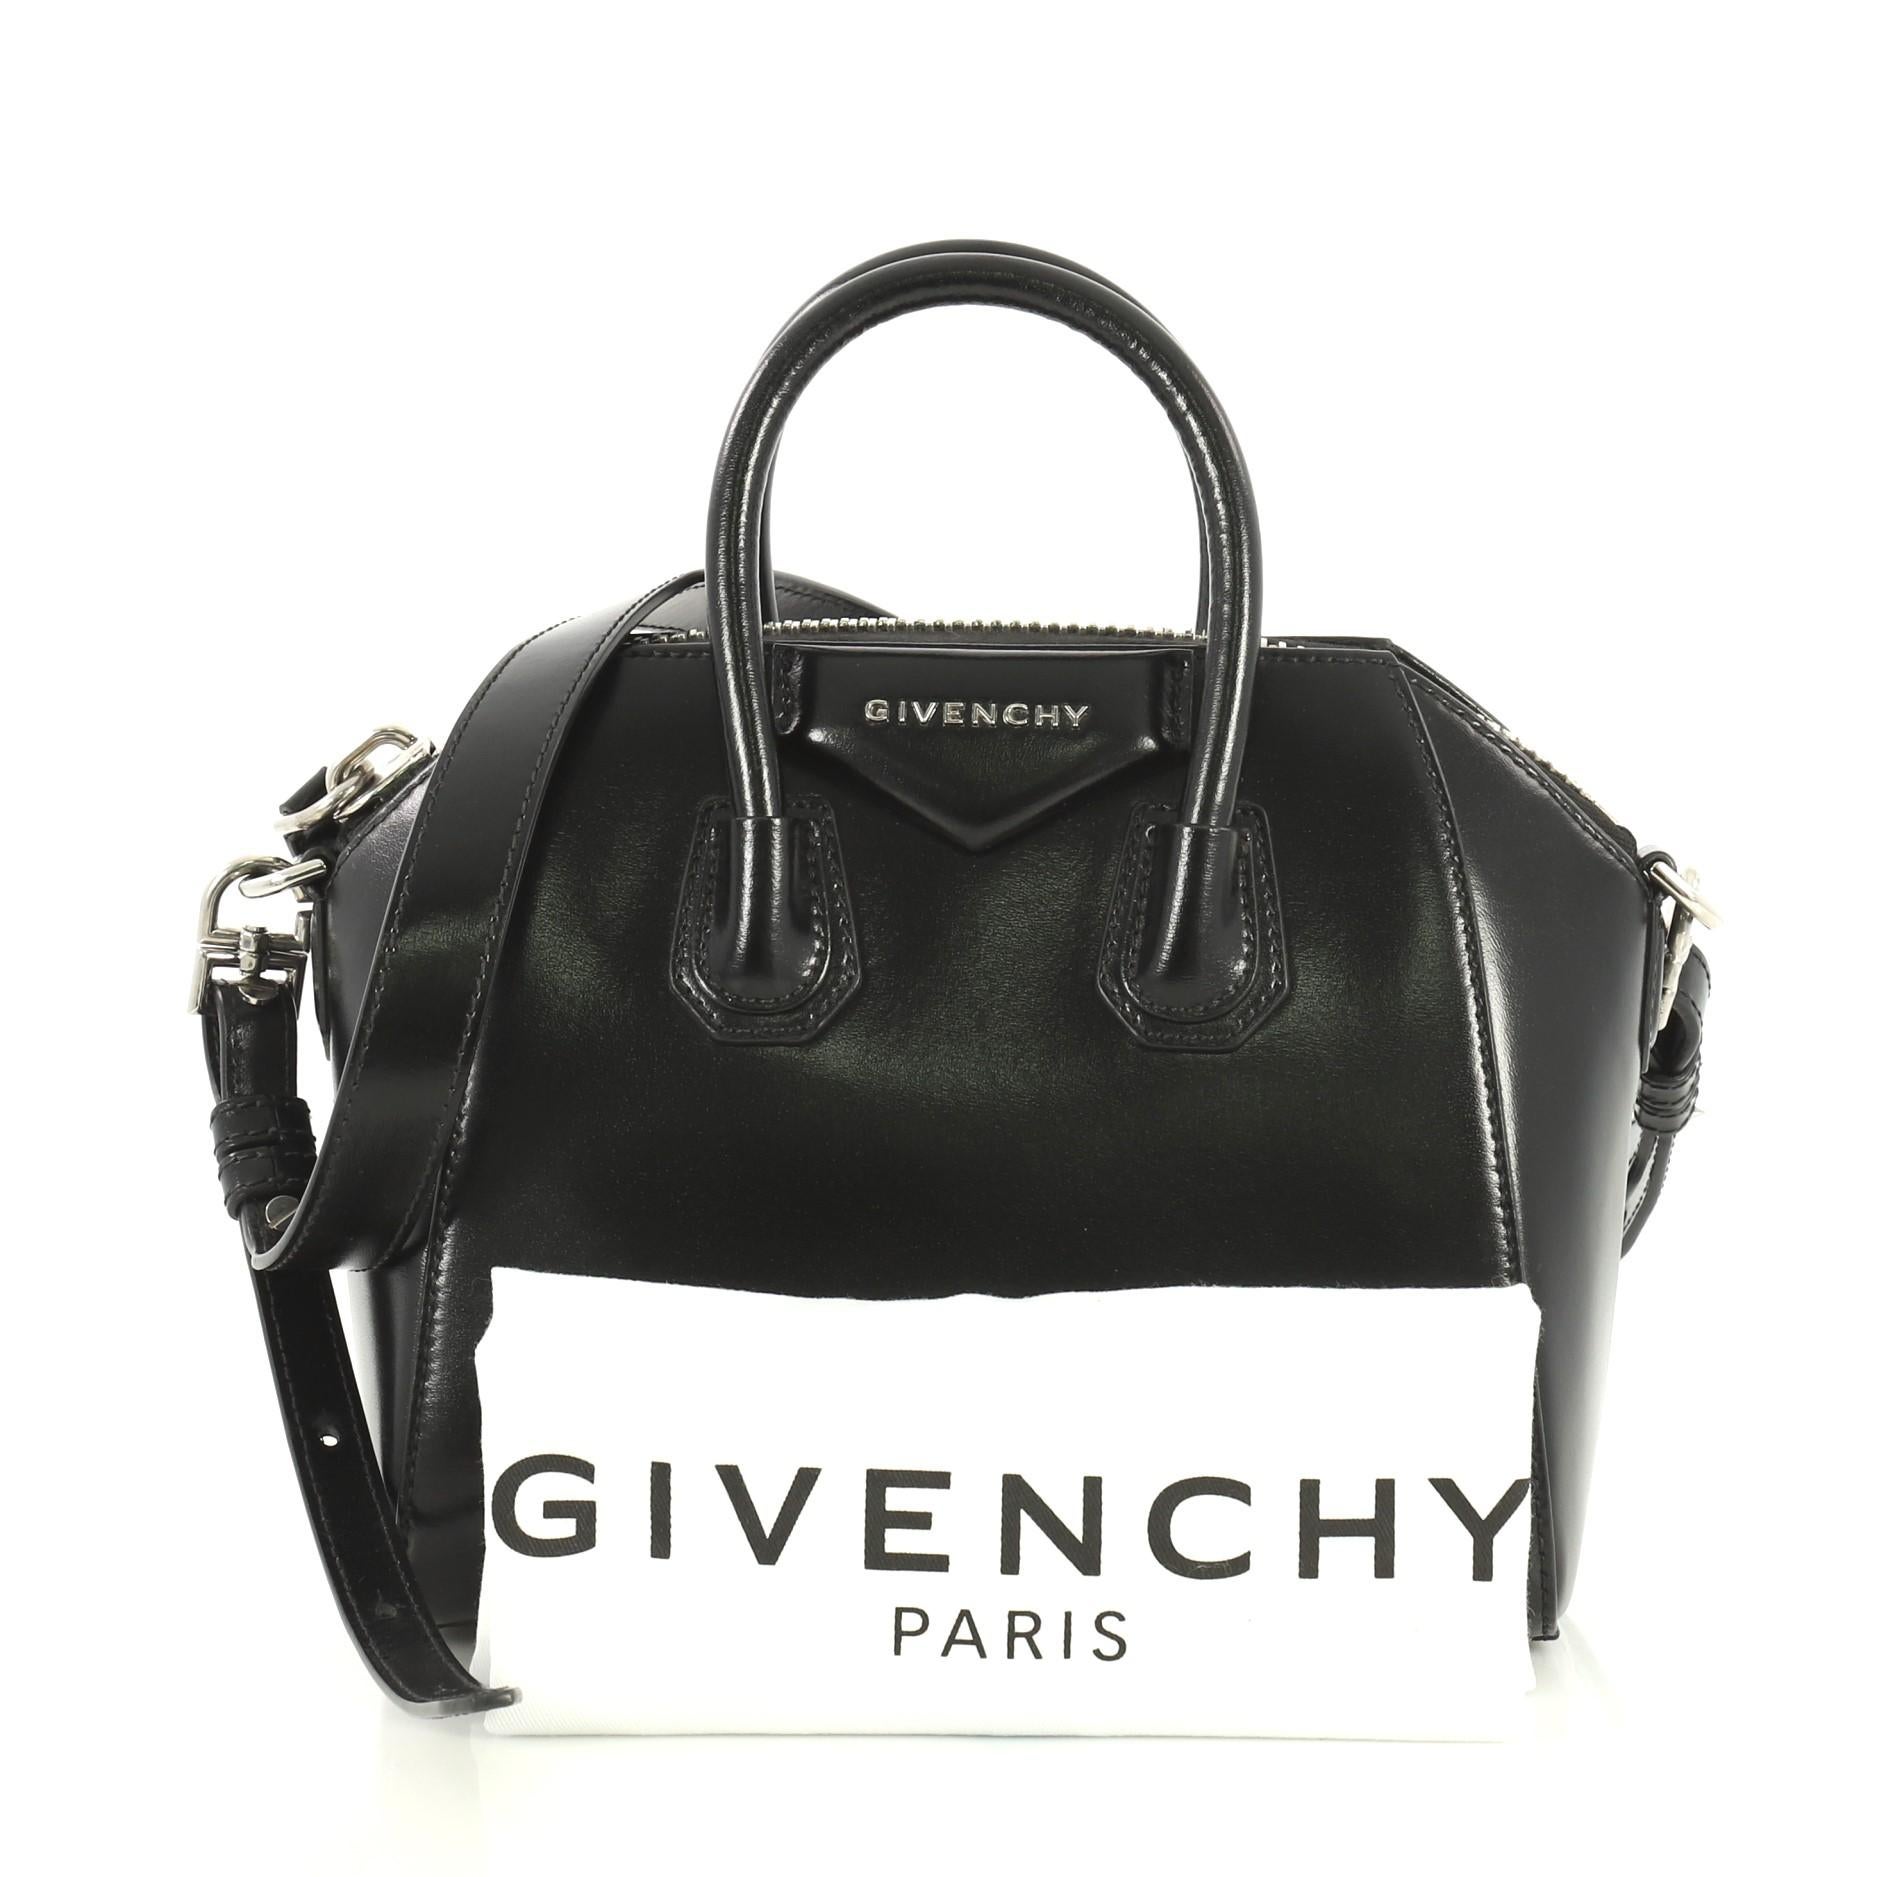 This Givenchy Antigona Bag Glazed Leather Mini, crafted from black glazed leather, features dual rolled leather handles and silver-tone hardware. Its zip closure opens to a black fabric interior with zip and slip pockets. 

Estimated Retail Price: